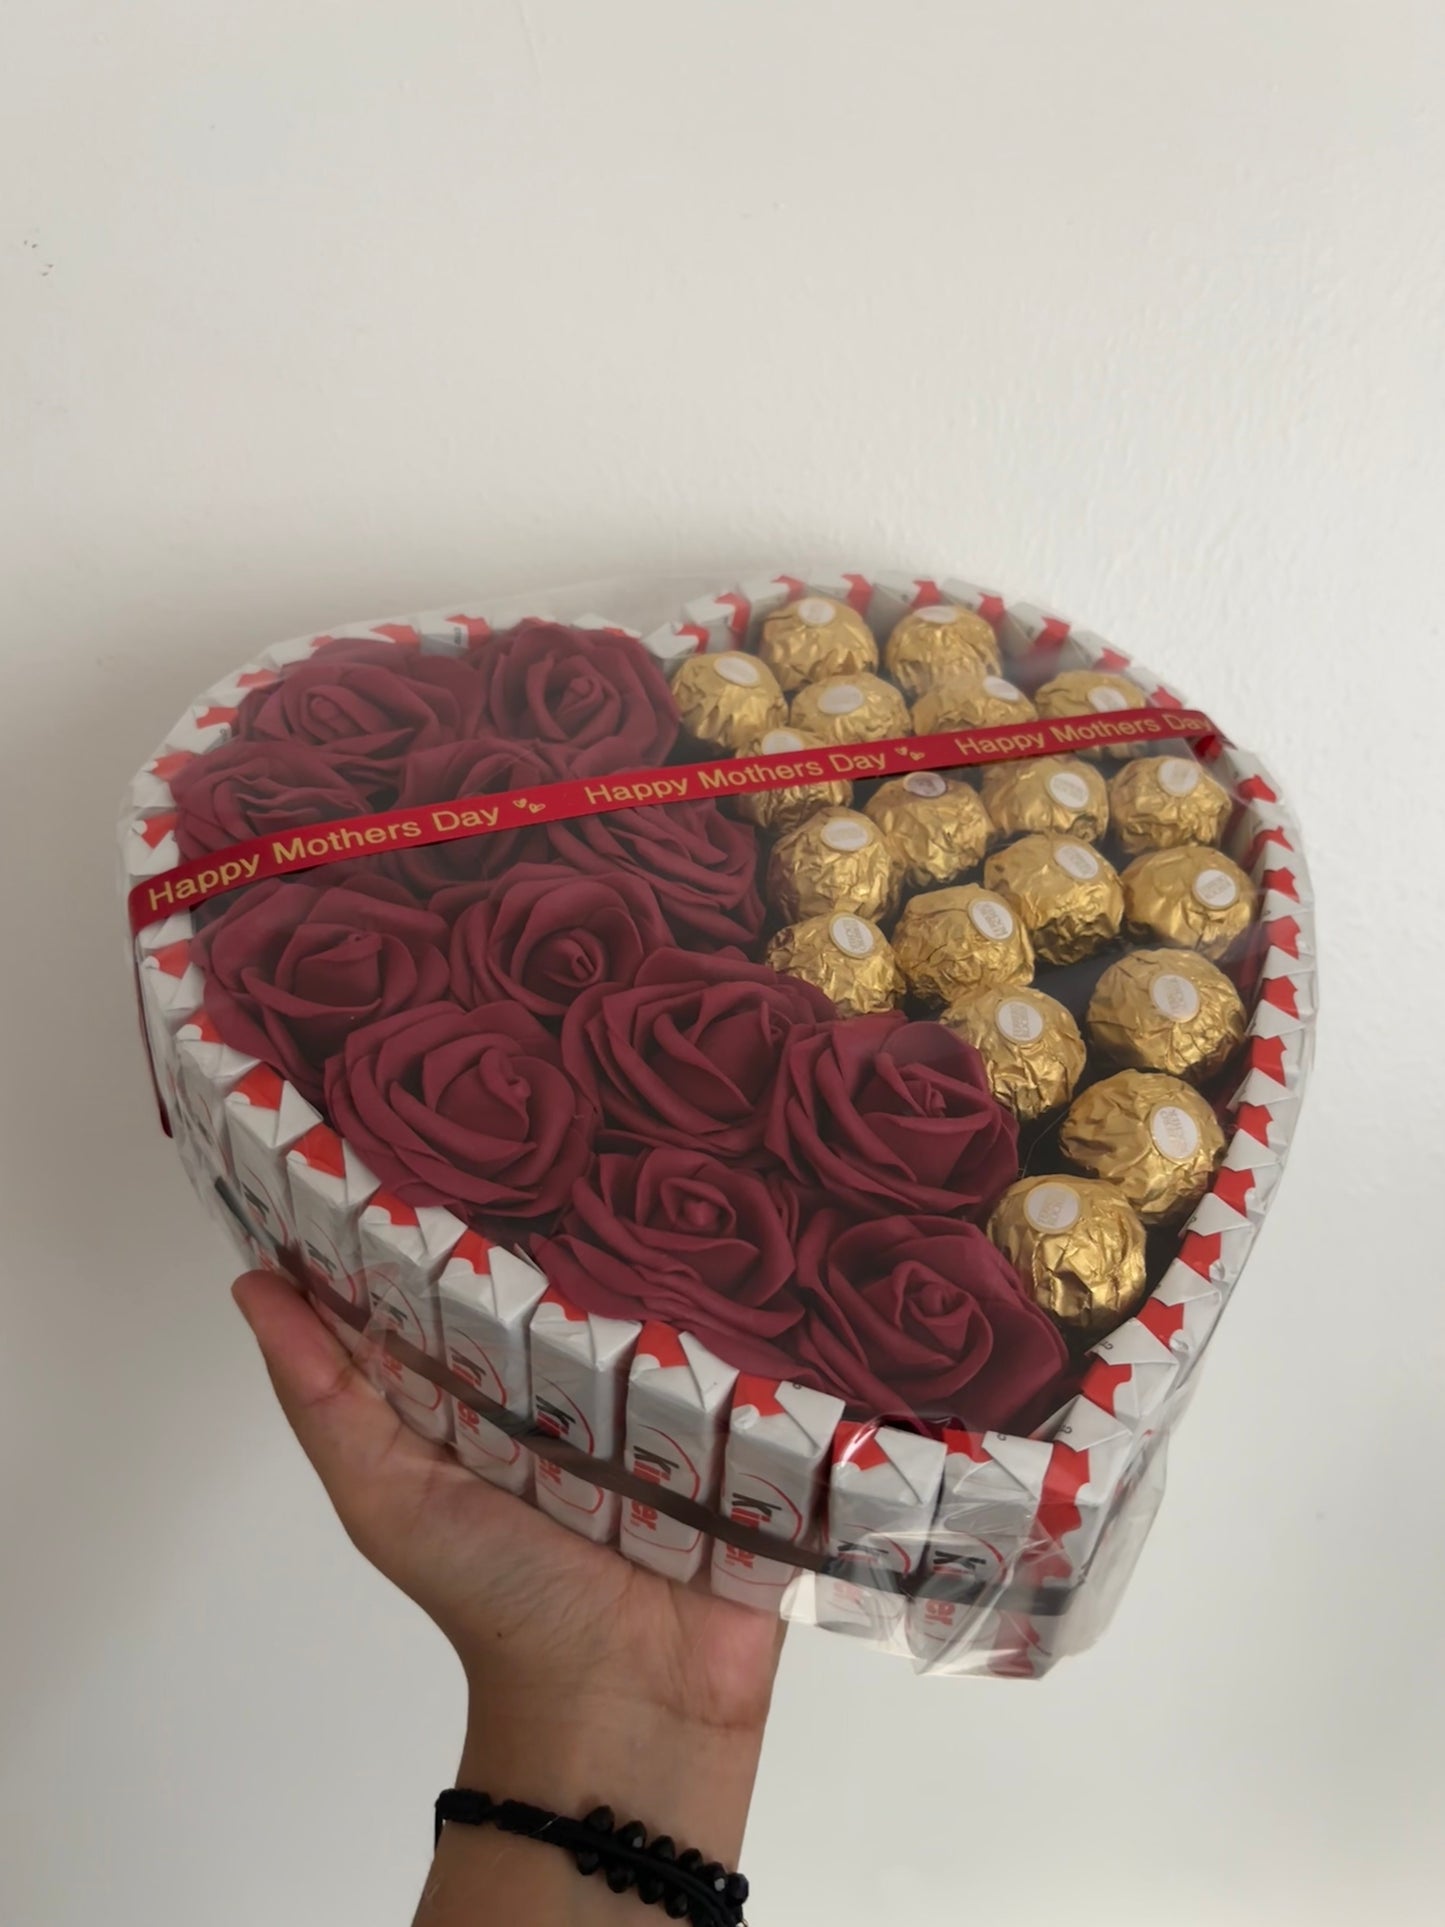 Kinder Heart with Roses & Ferrero Rocher